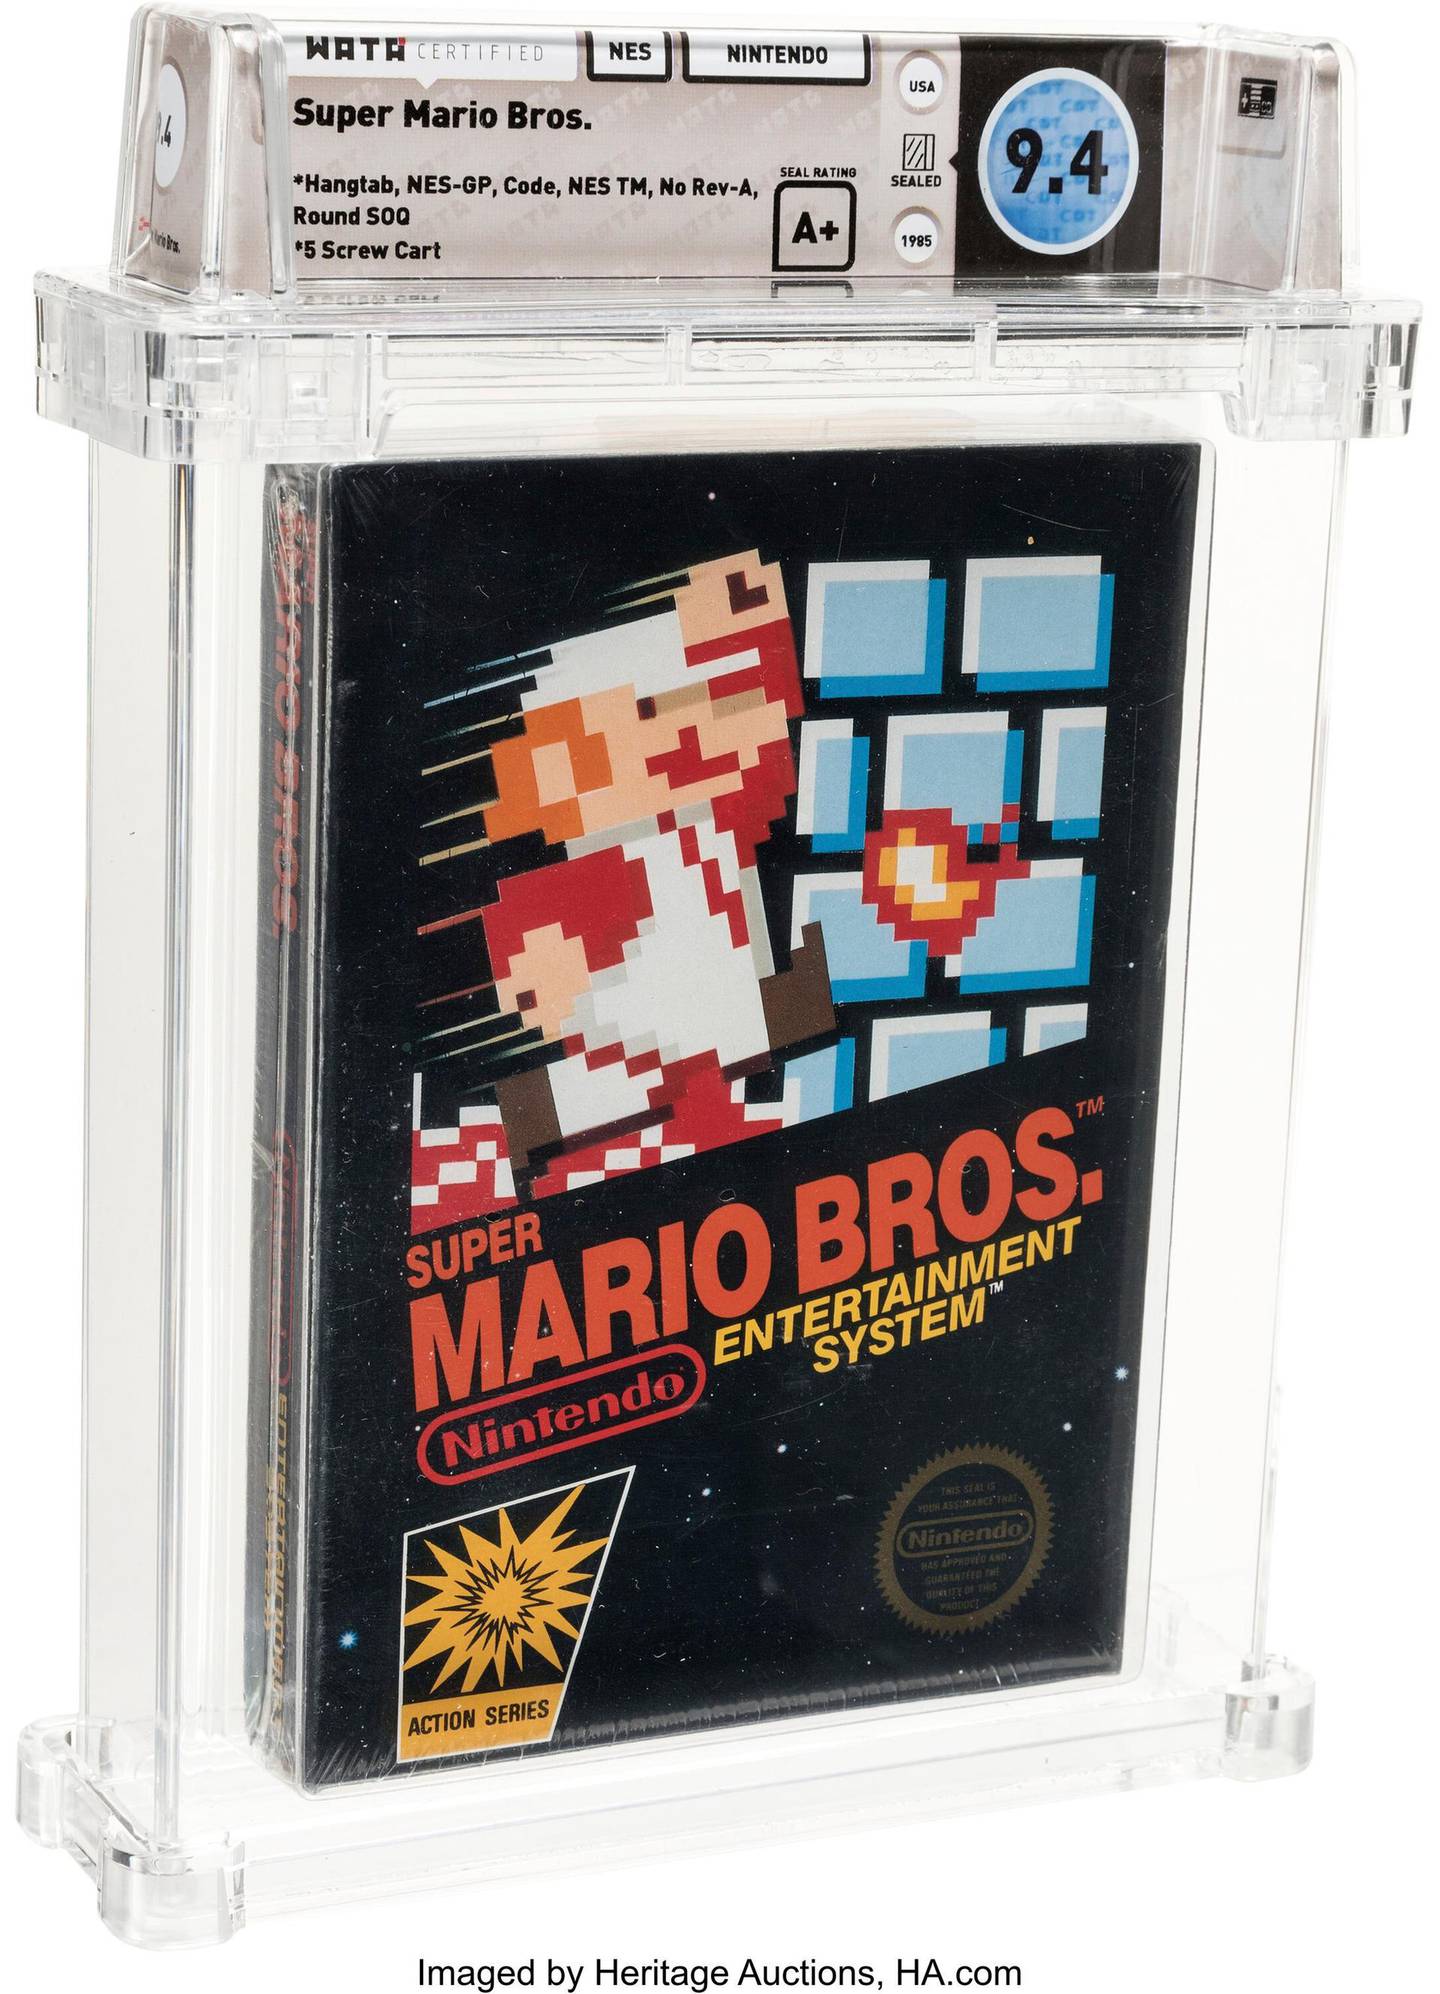 This photo provided by Heritage Auctions on Saturday, July 11, 2020, shows the front of an unopened copy of a vintage Super Mario Bros. video game that has been sold for $114,000 in an auction that underscored the enduring popularity of entertainment created decades earlier. (Emily Clemens/Heritage Auctions via AP)